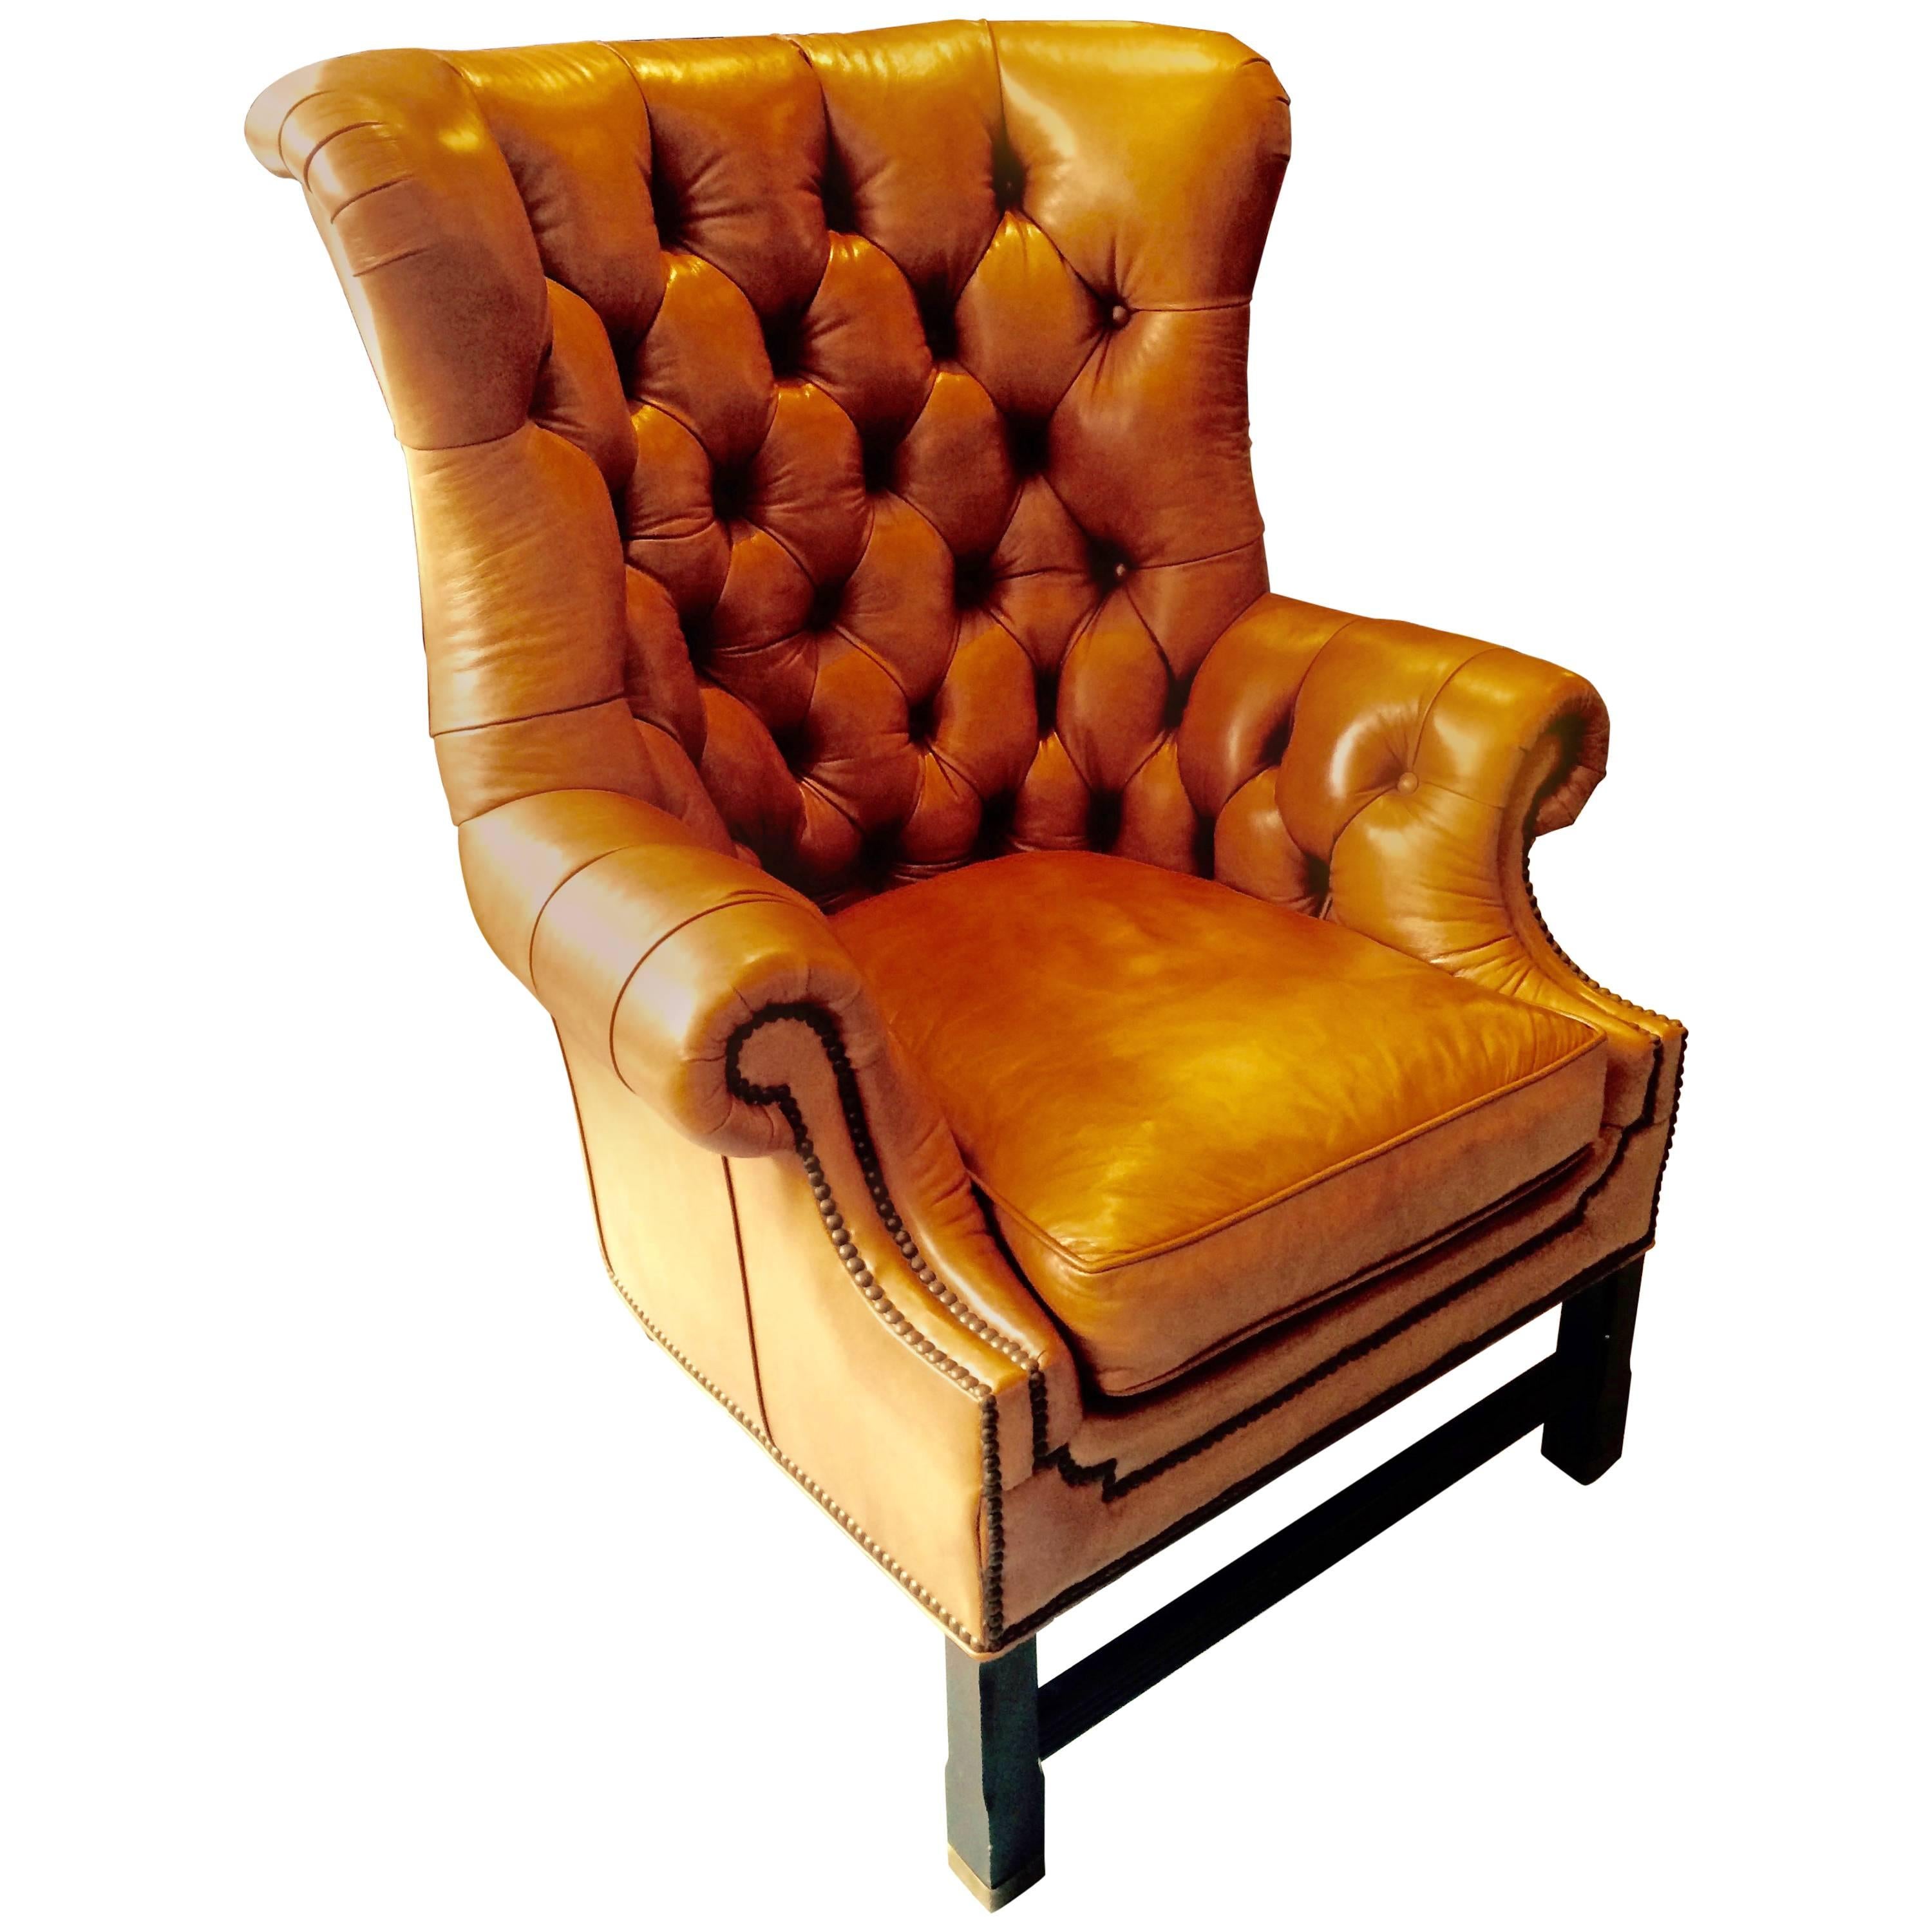 Handsome leather upholstered wing chair in wonderful shade of camel; leather tufted with nailhead trim. Feet have brushed brass caps. Made by Whittemore Sherrill. Seat depth measures: 25".
  
    